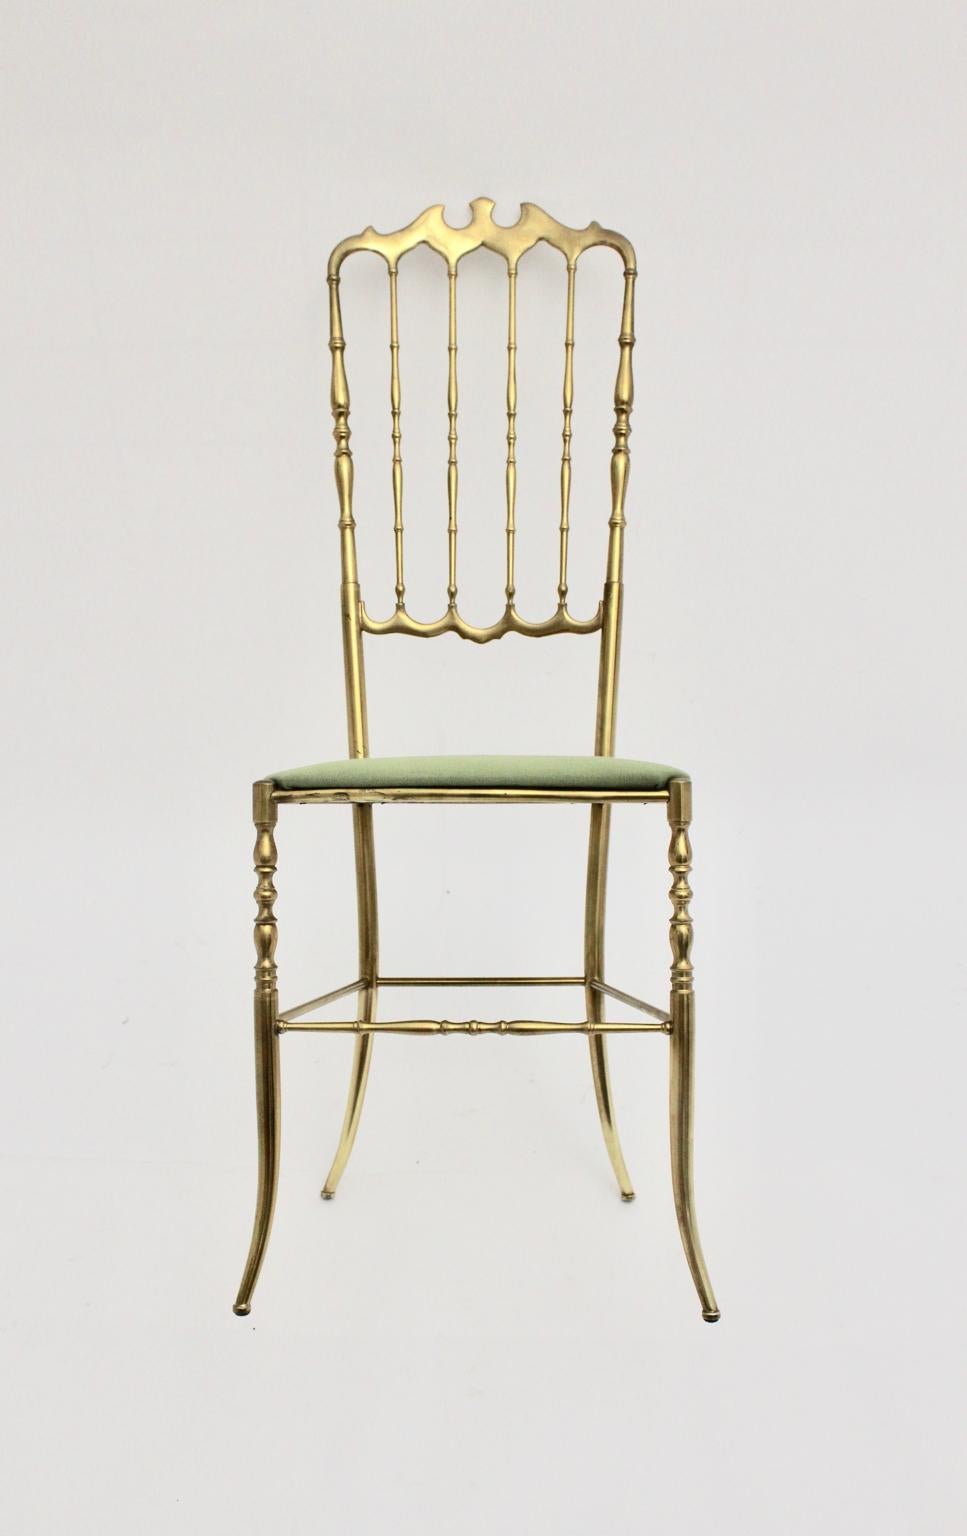 Mid Century Modern delightful vintage brass Chiavari side chair 1950s, Italy, shows a brass frame and a seat, which is newly covered with green textile fabric.
The vintage condition is very good.
Approximate measures:
Width 42 cm
Depth 41 cm
Height